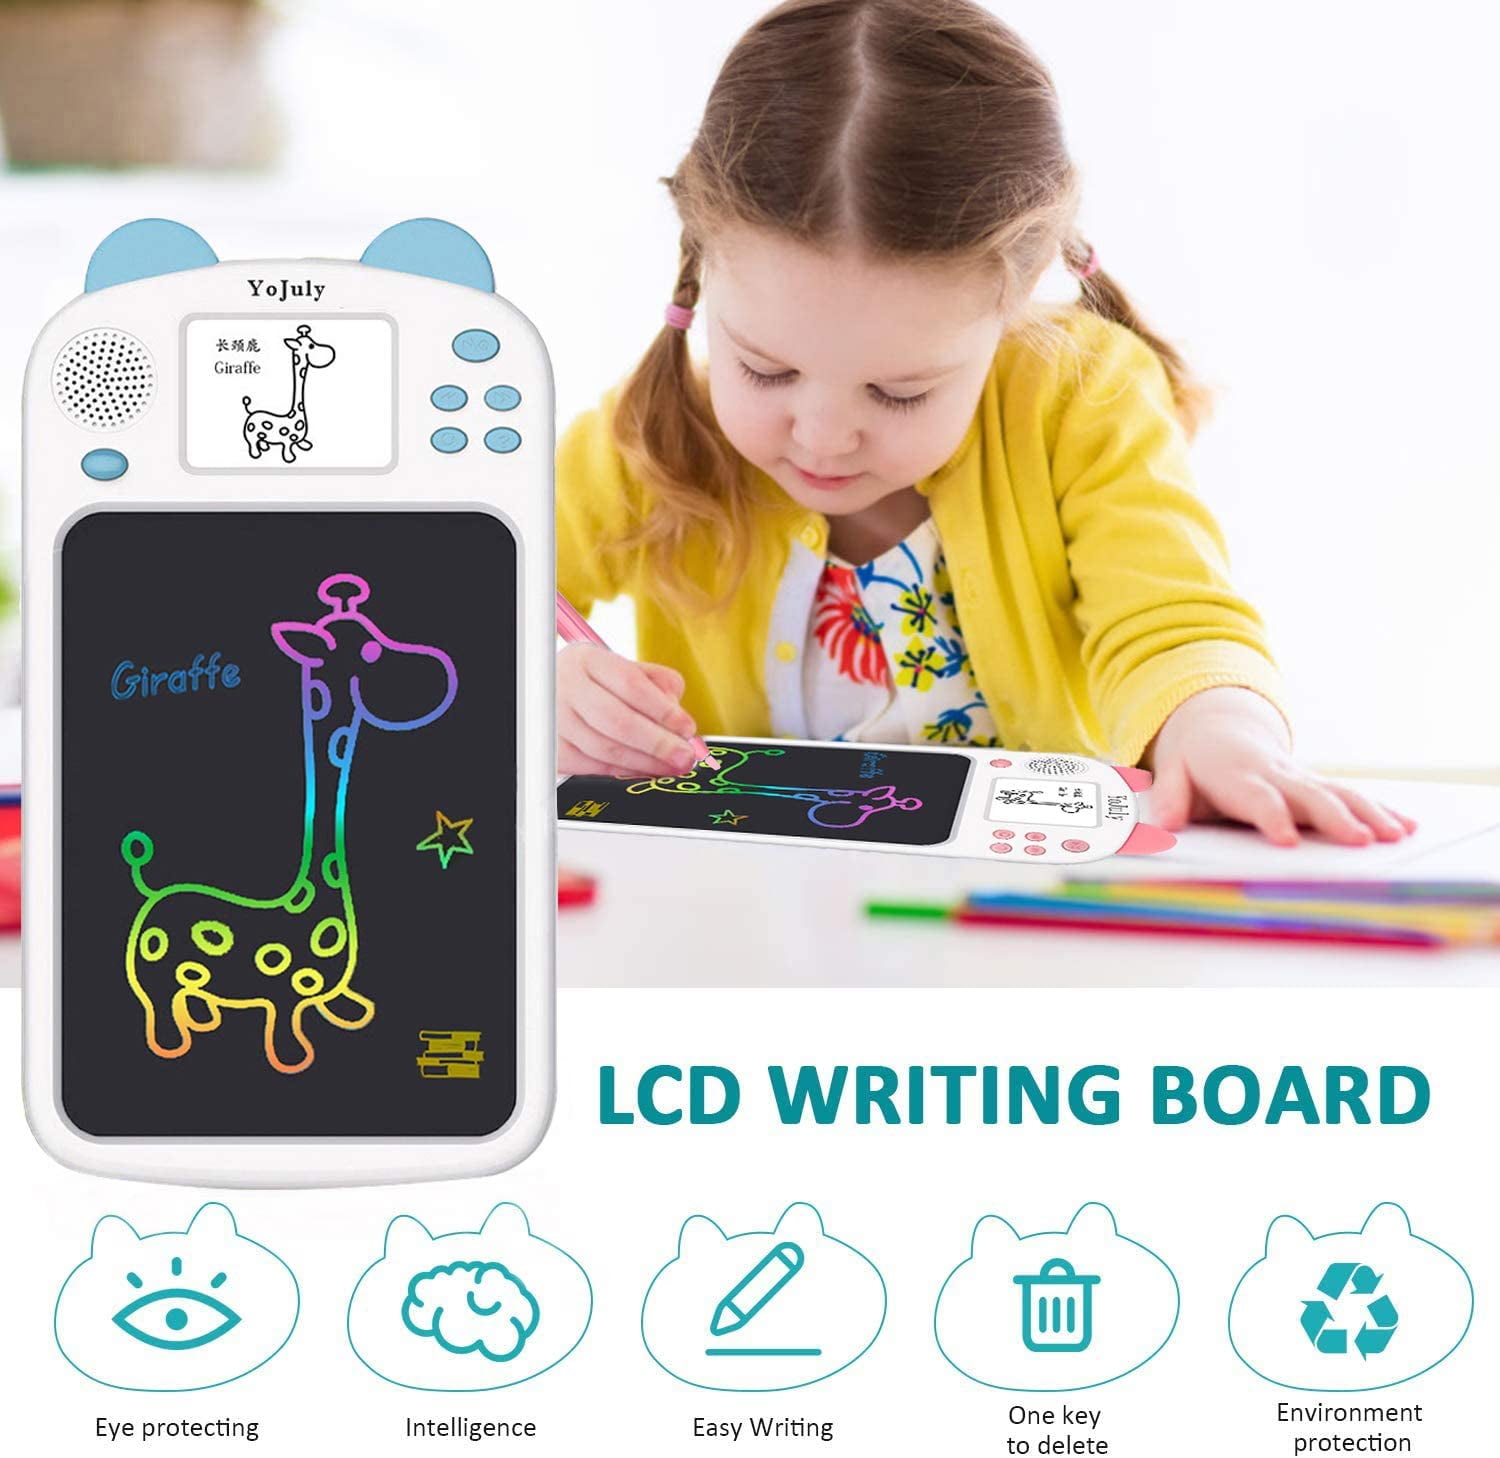 8.5 inch Erasable Electronic Digital Drawing Pad Doodle Board,2.8-inch Audible Electronic Display,Hundreds of pictures Choose,Doodle Pads Drawing Board Gift for Kids Blue YoJuly LCD Writing Tablet 